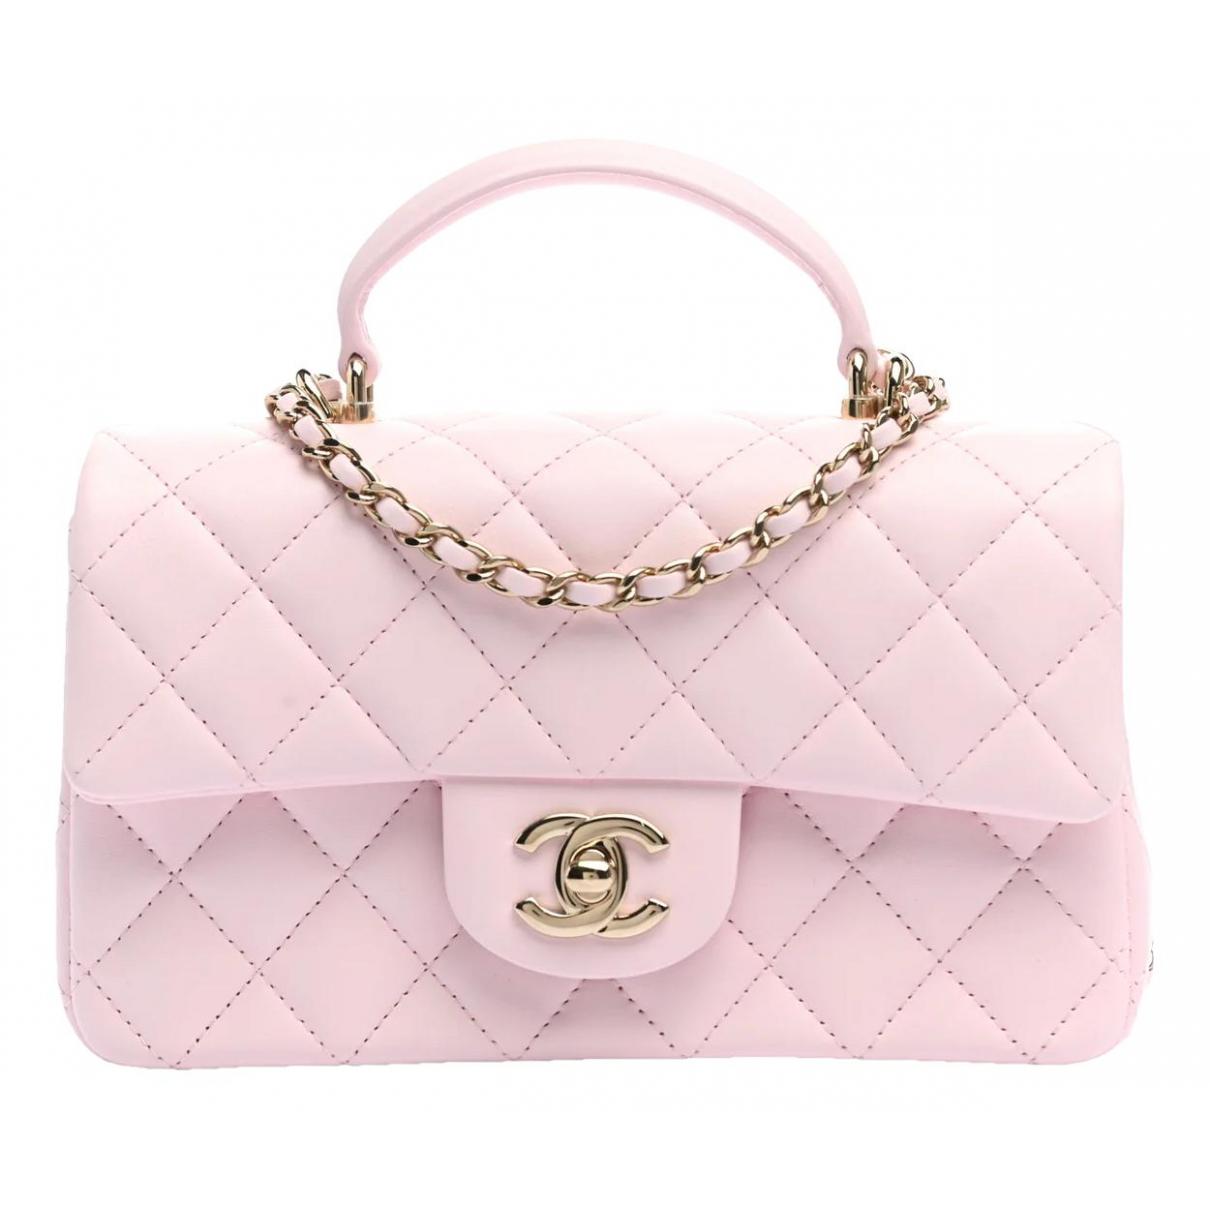 Timeless/classique leather crossbody bag Chanel Pink in Leather - 25262031